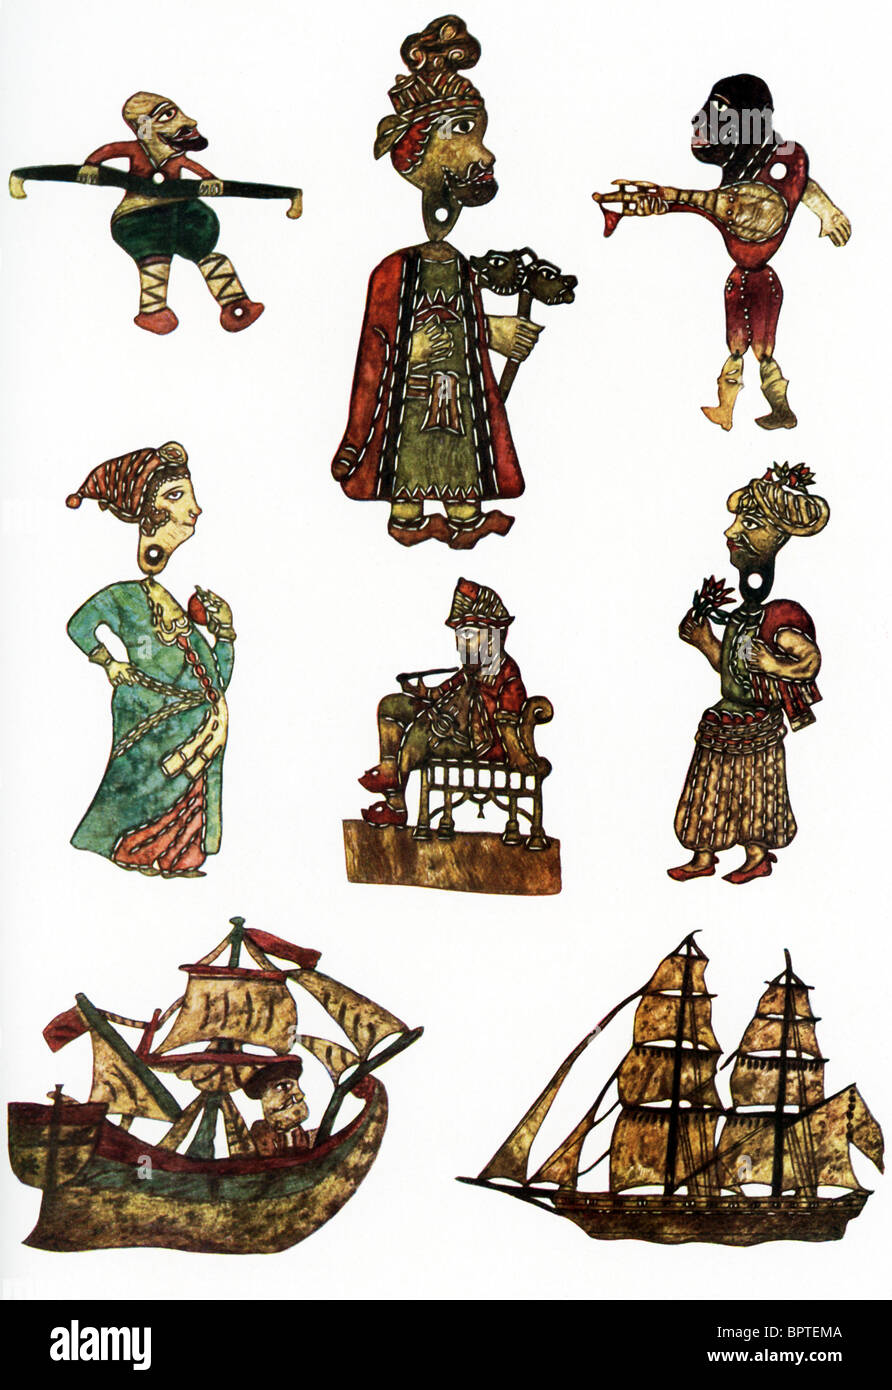 Karagoz  ('Black Eye') is the name for the traditional Turkish shadow puppet theater. Pictured here are 8 puppets. Stock Photo